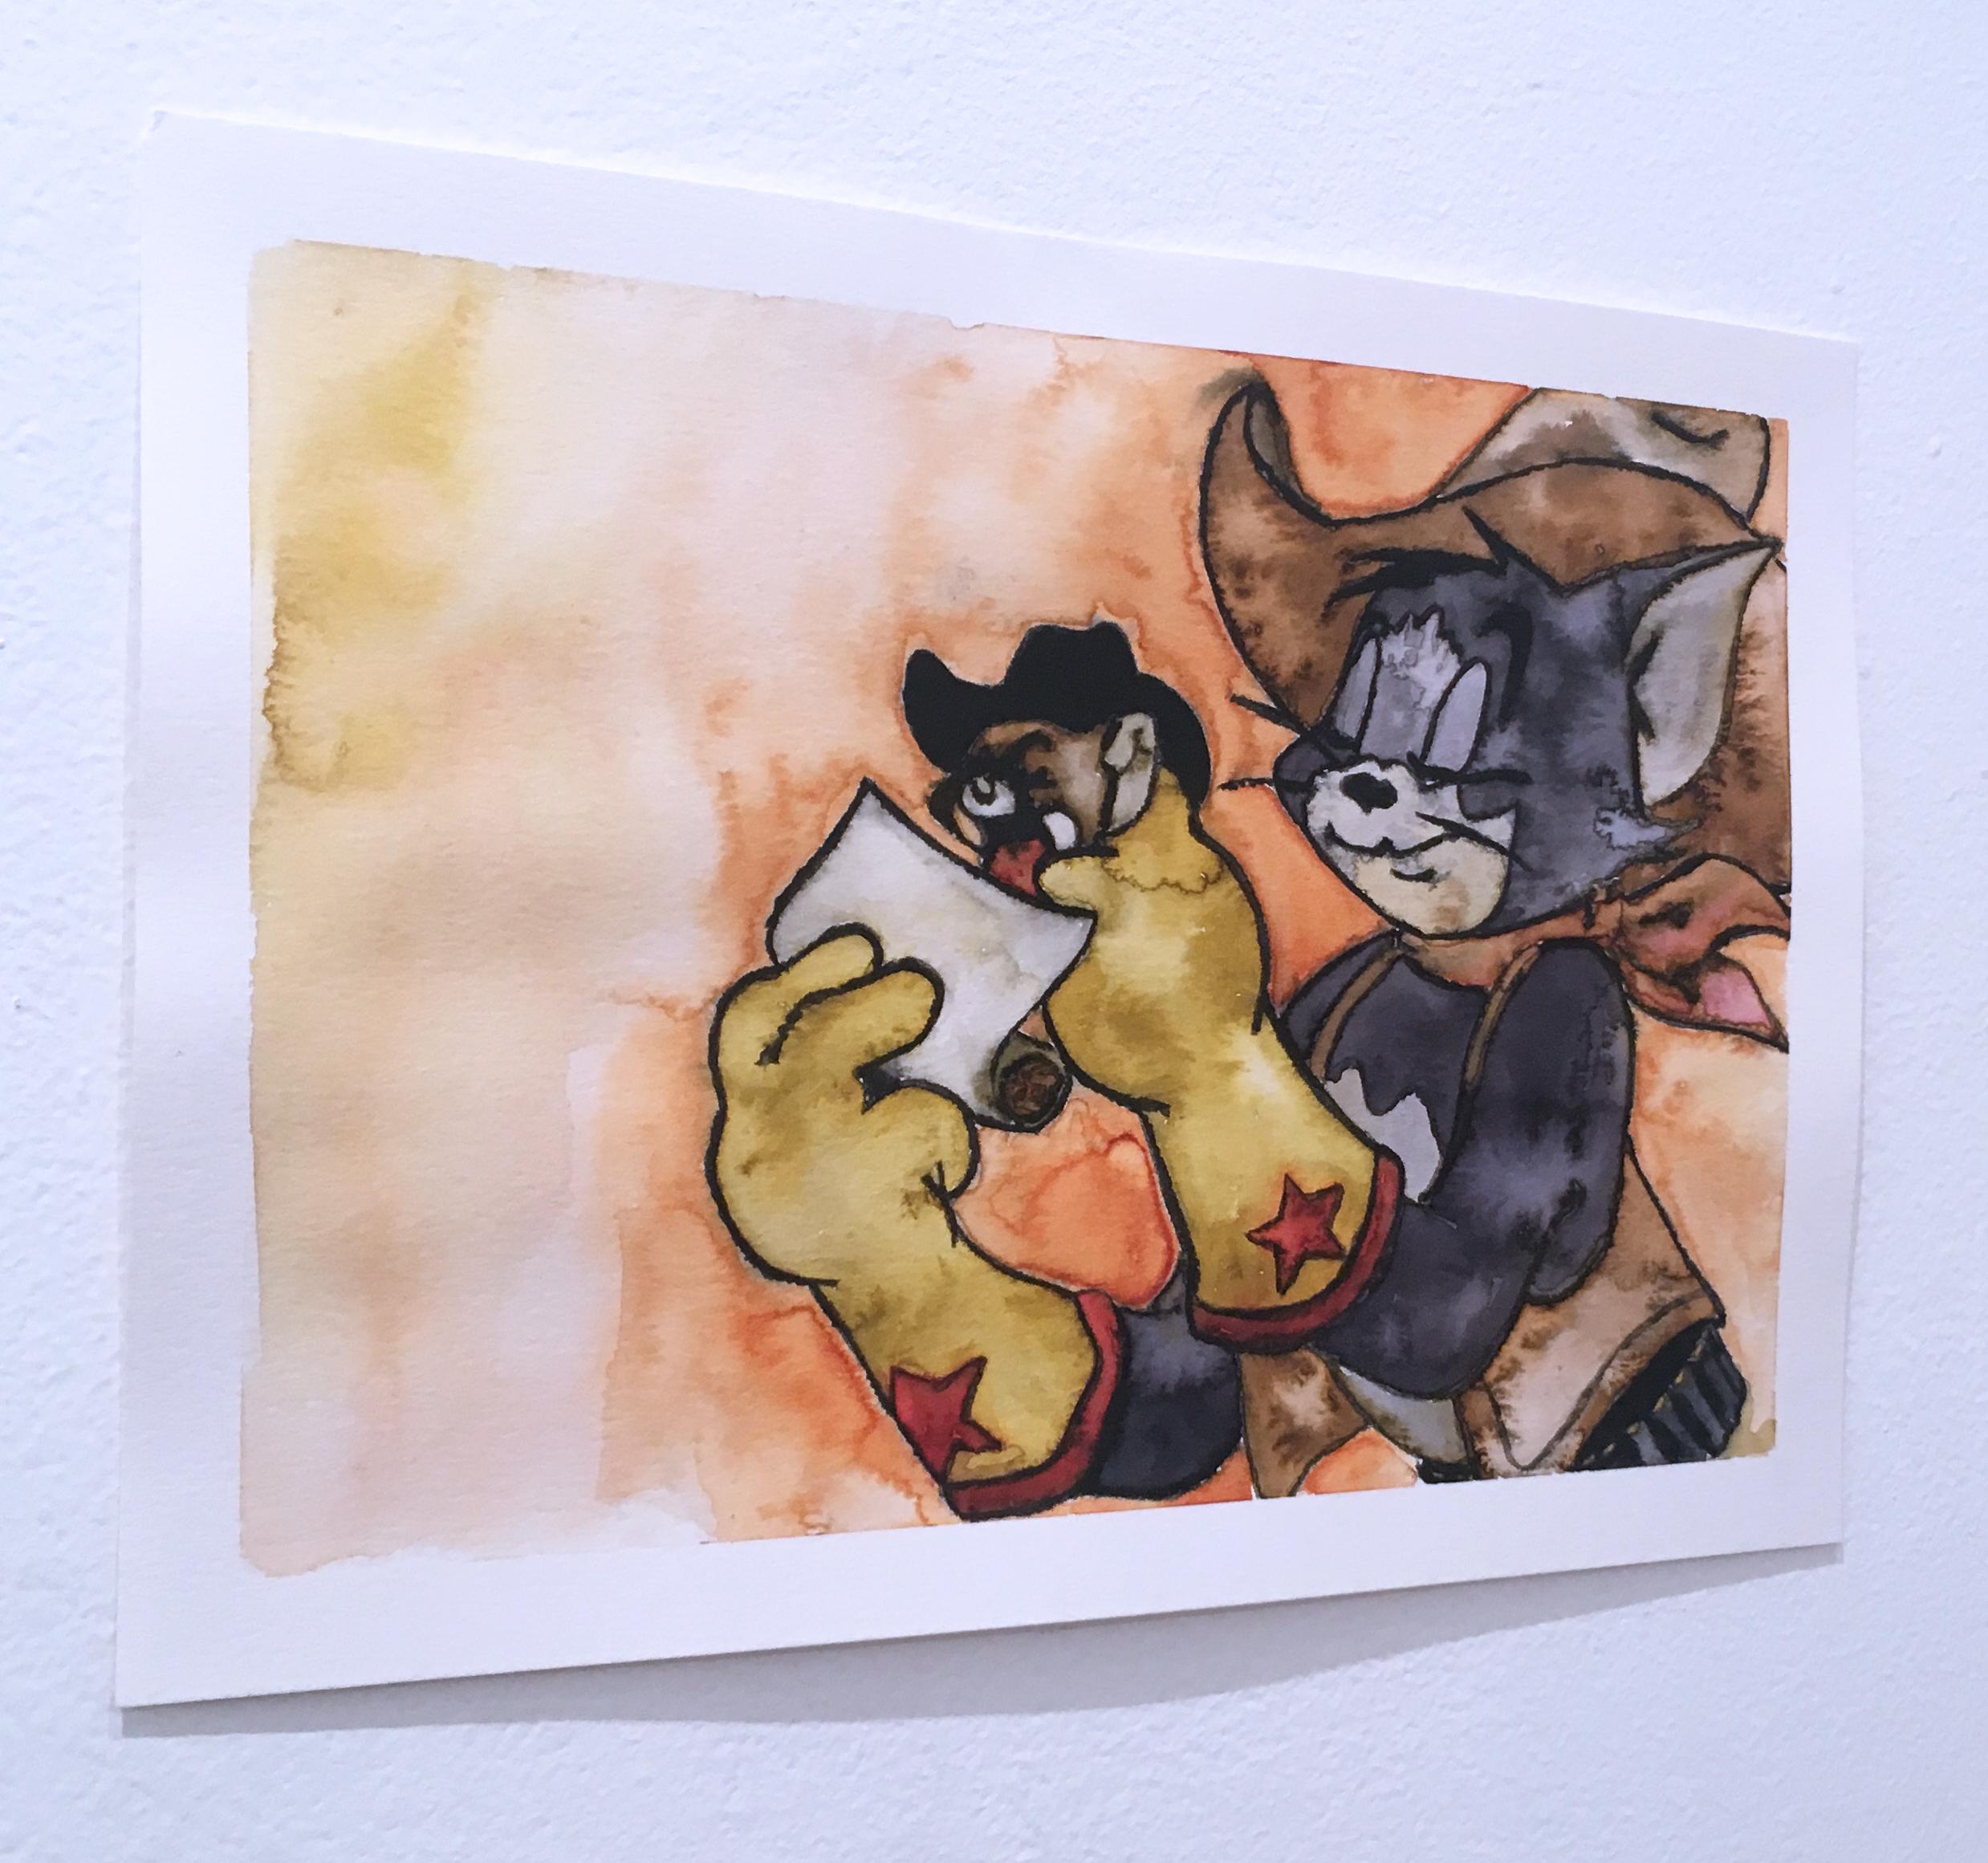 Smoke Break, Limited Edition print of original Tom & Jerry watercolor painting - Print by Rob Kaniuk